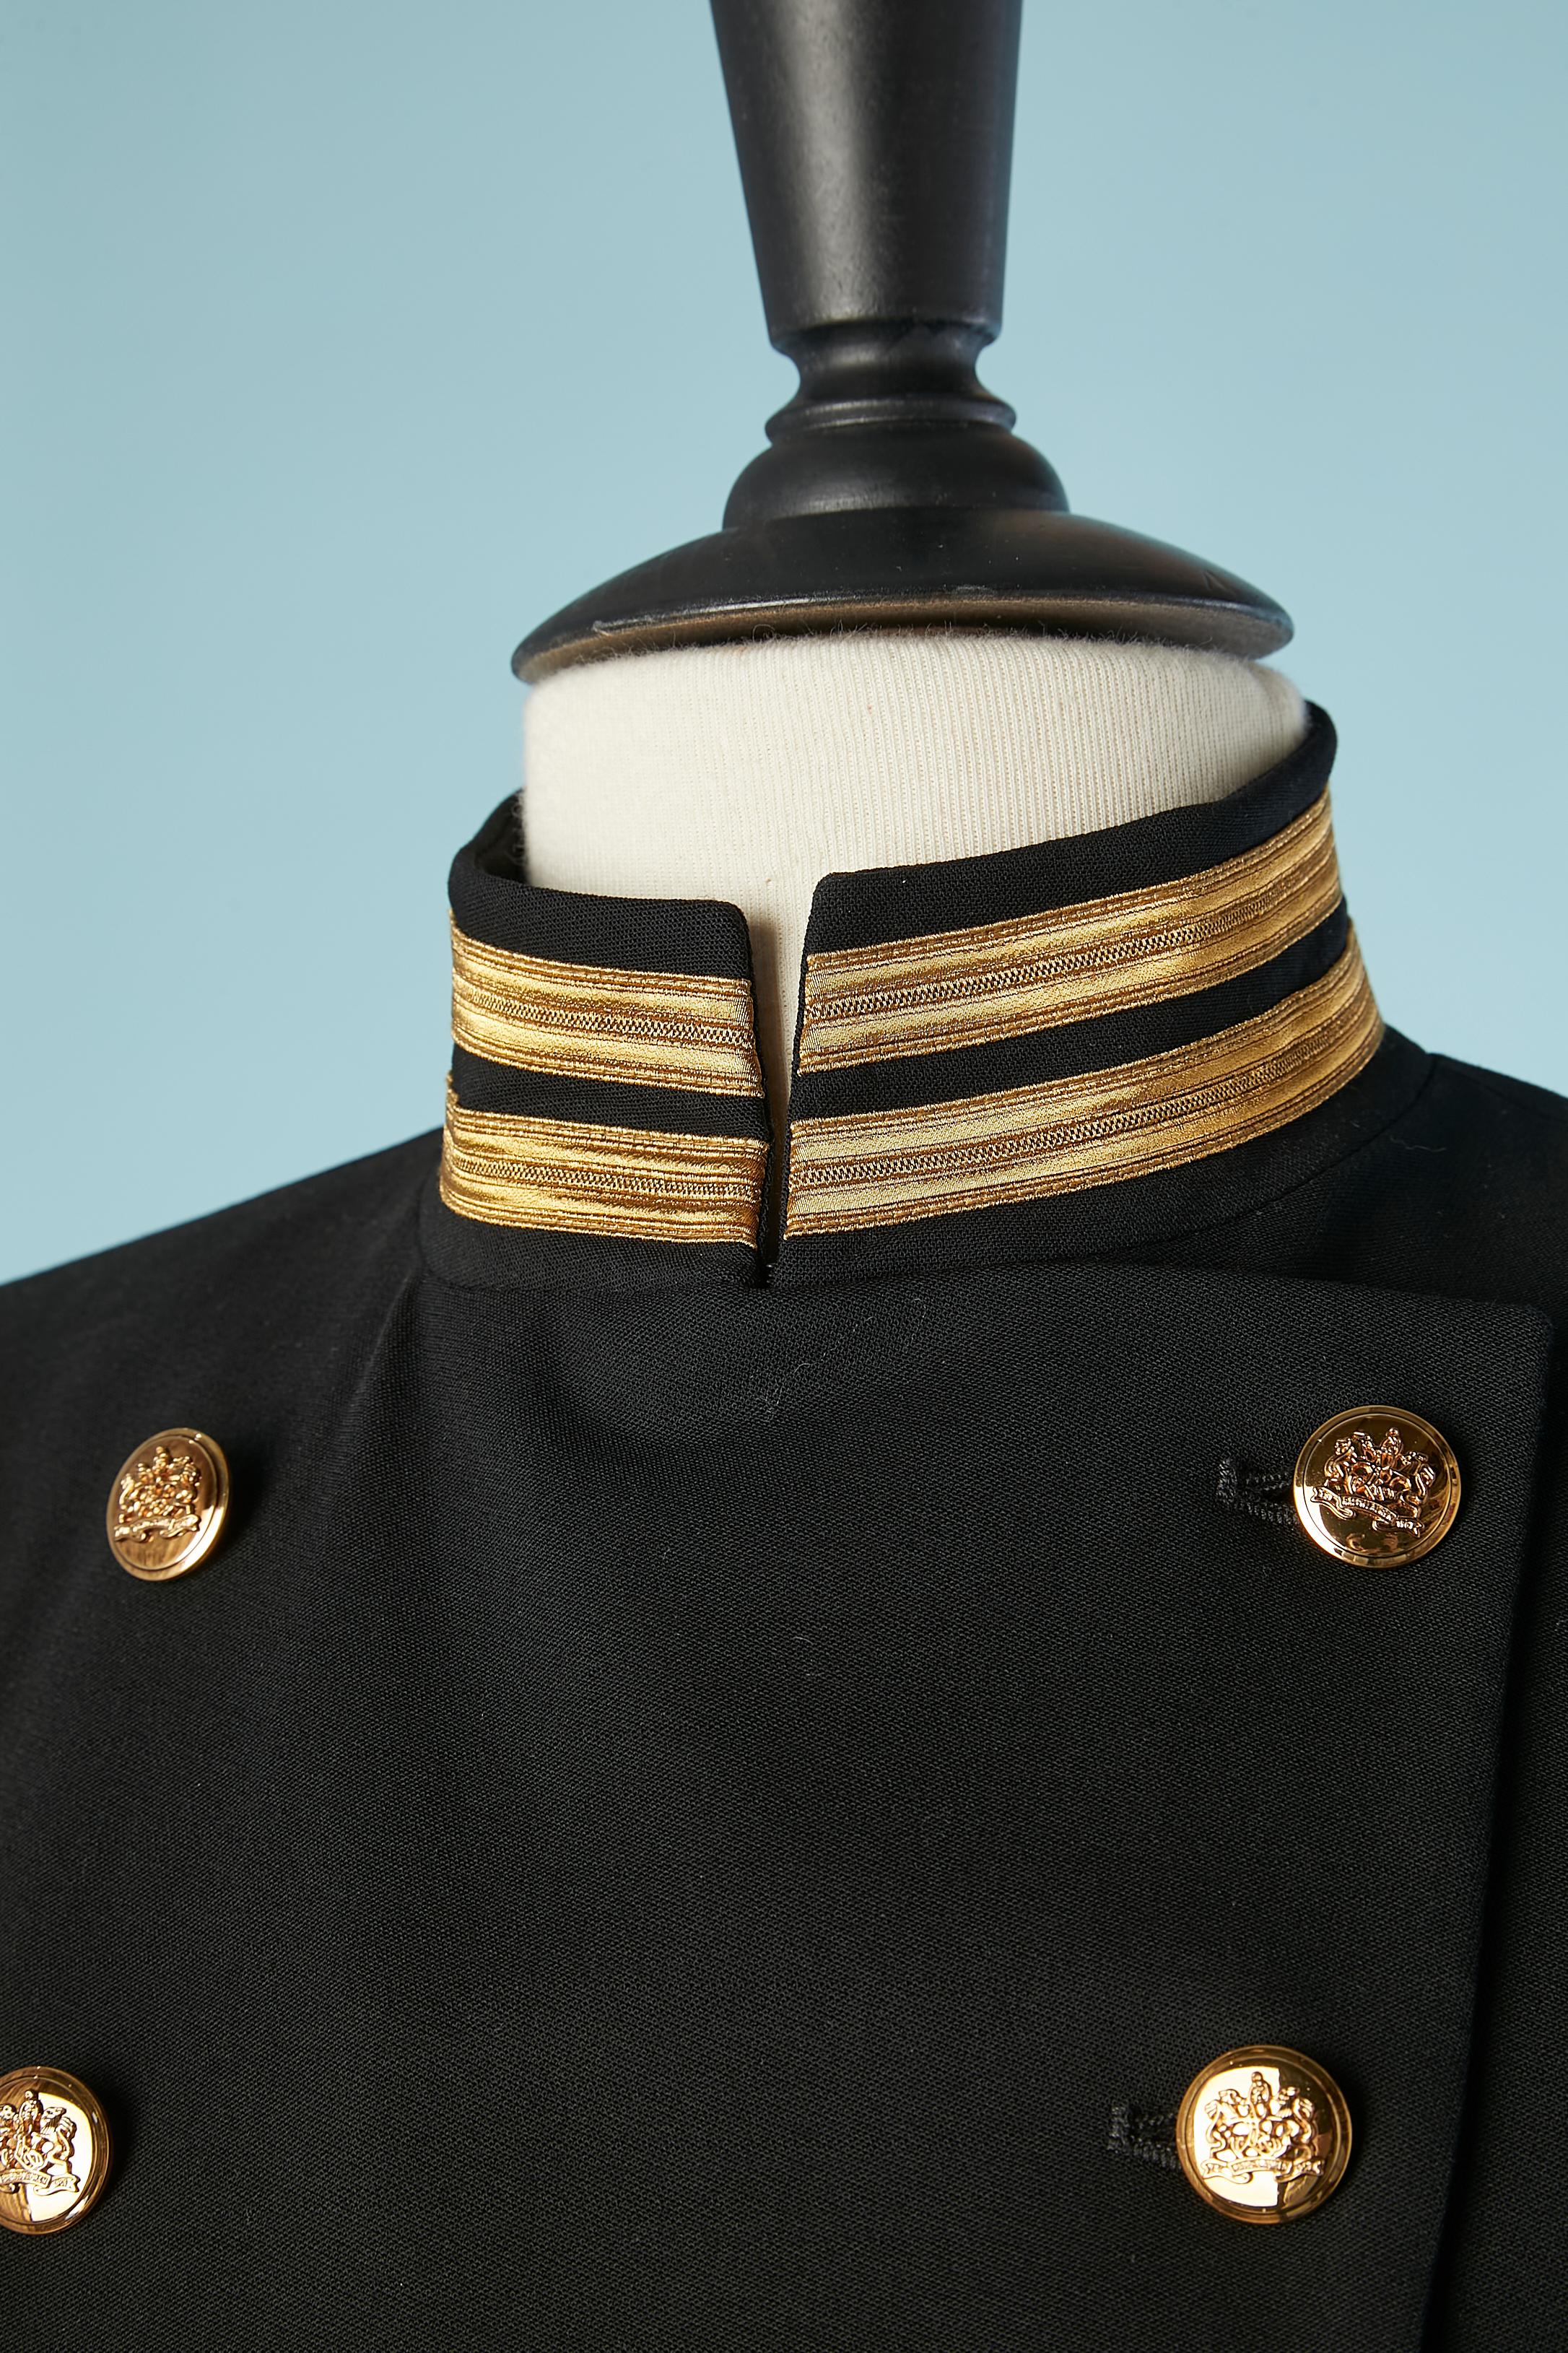 Navy double-breasted officier style jacket. 
Main fabric composition: 98% wool, 2% elastan. Lining: 93% silk, 7% elastane. 
Shoulder-pad. 
SIZE 4 (Us) 34 (Fr) XS 